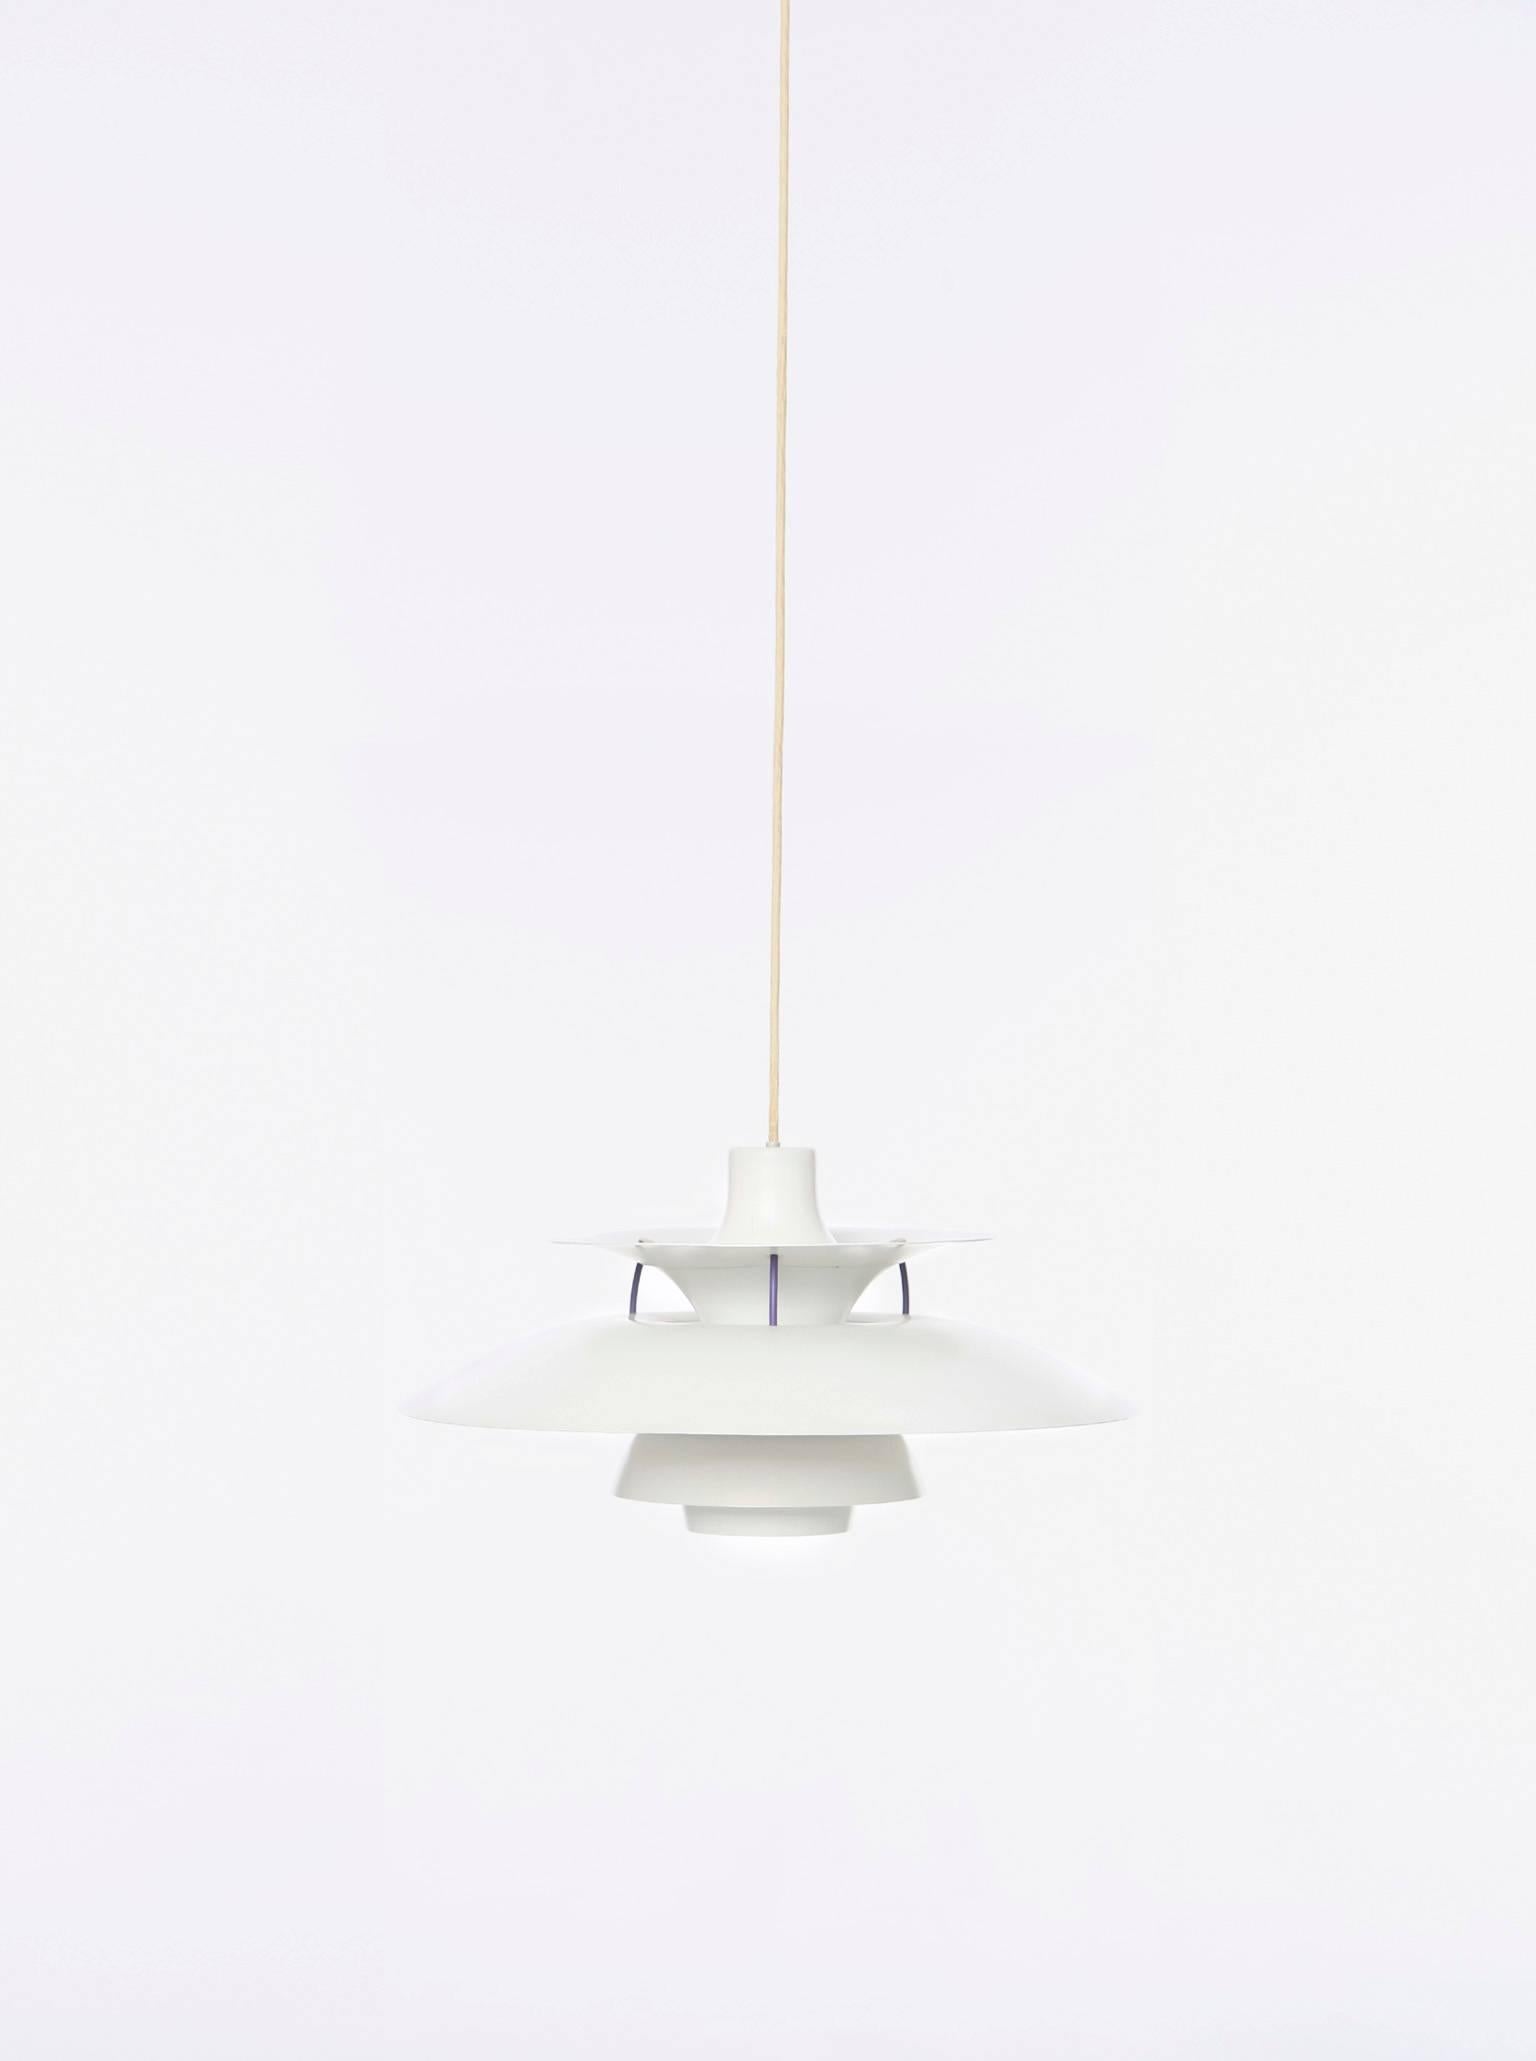 A vintage PH5 hanging lamp designed by Poul Henningsen for Louis Poulsen. 

First manufactured in 1957 for Louis Poulsen, this striking vintage PH5 Pendant is one of the most recognizable designs by Poul Henningsen. Original white colour finish